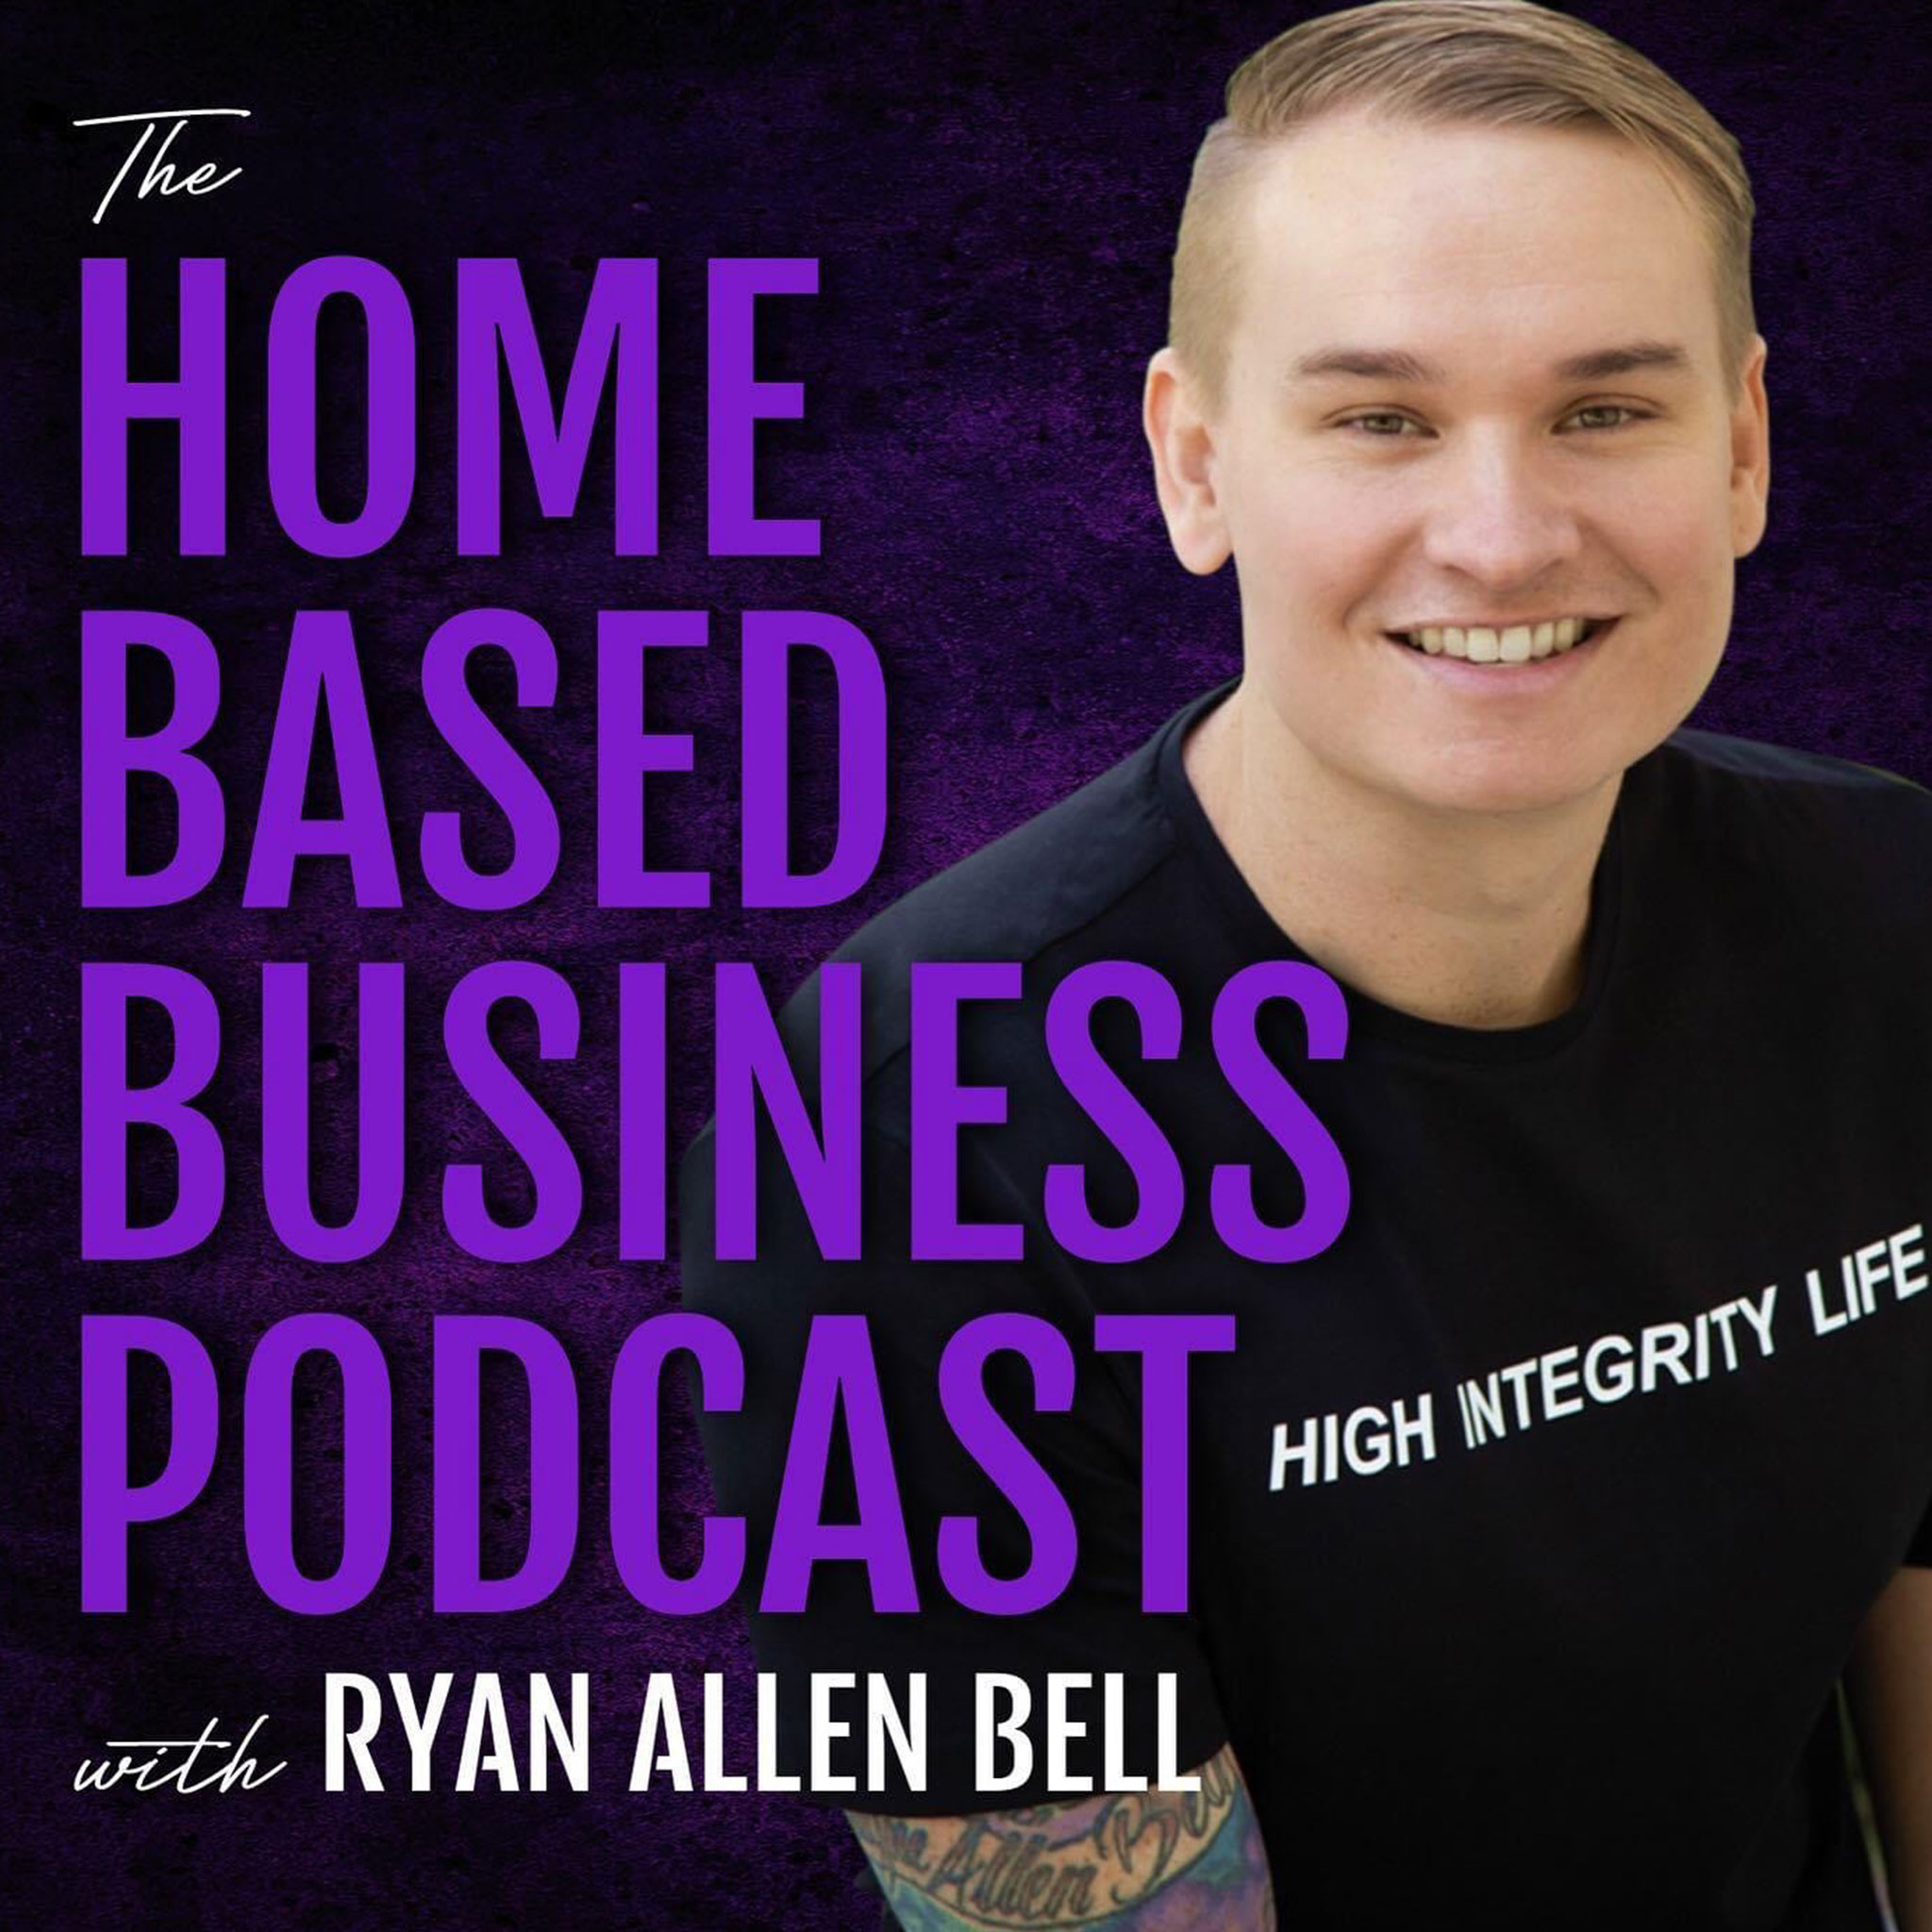 Artwork for The Home Based Business Podcast